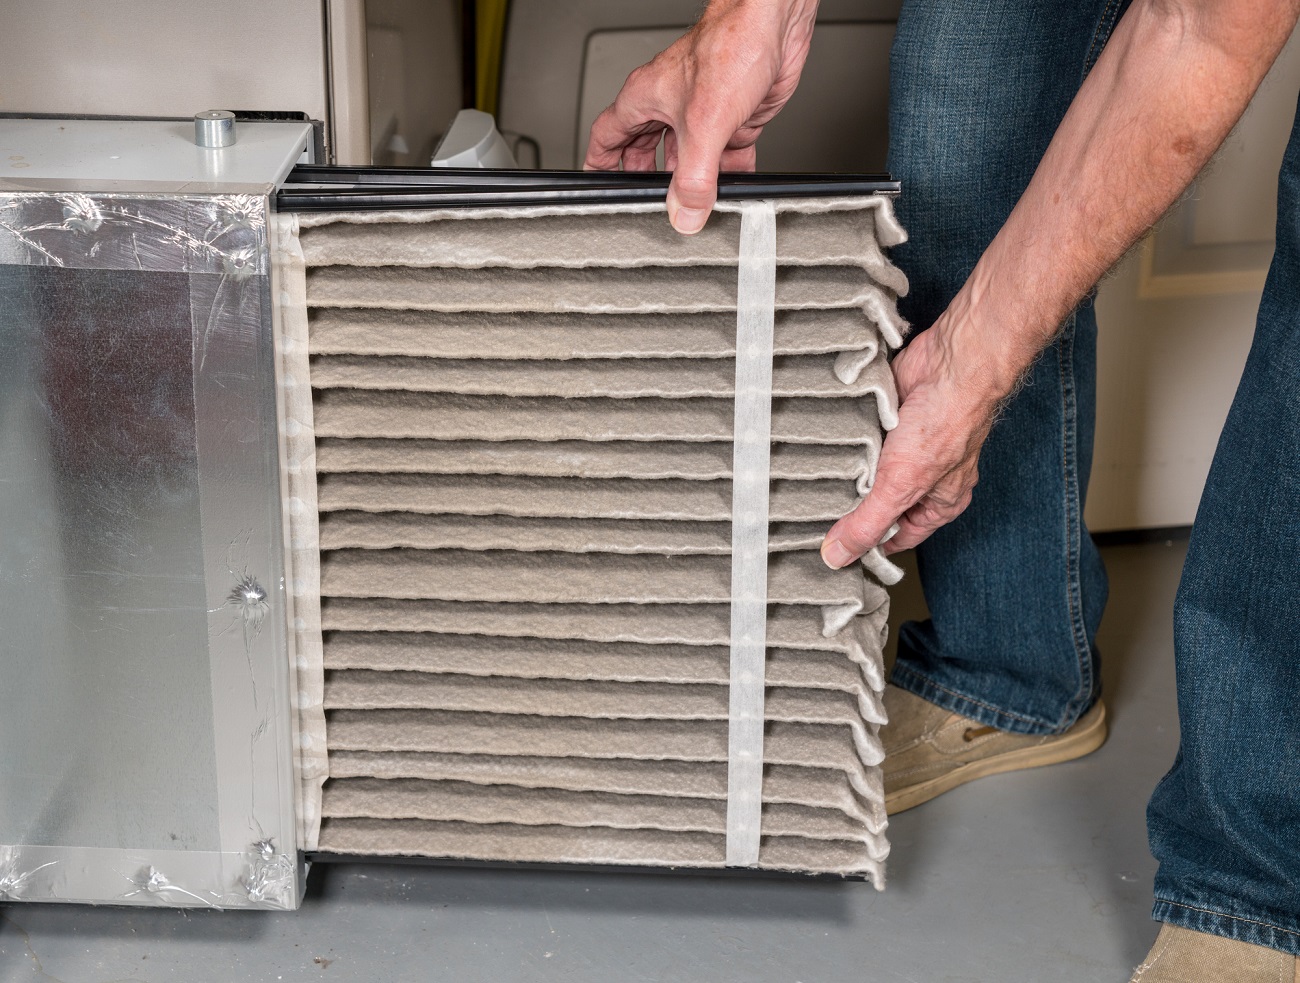 What Filter Should I Use In My Condo HVAC? - Home Trade Standards